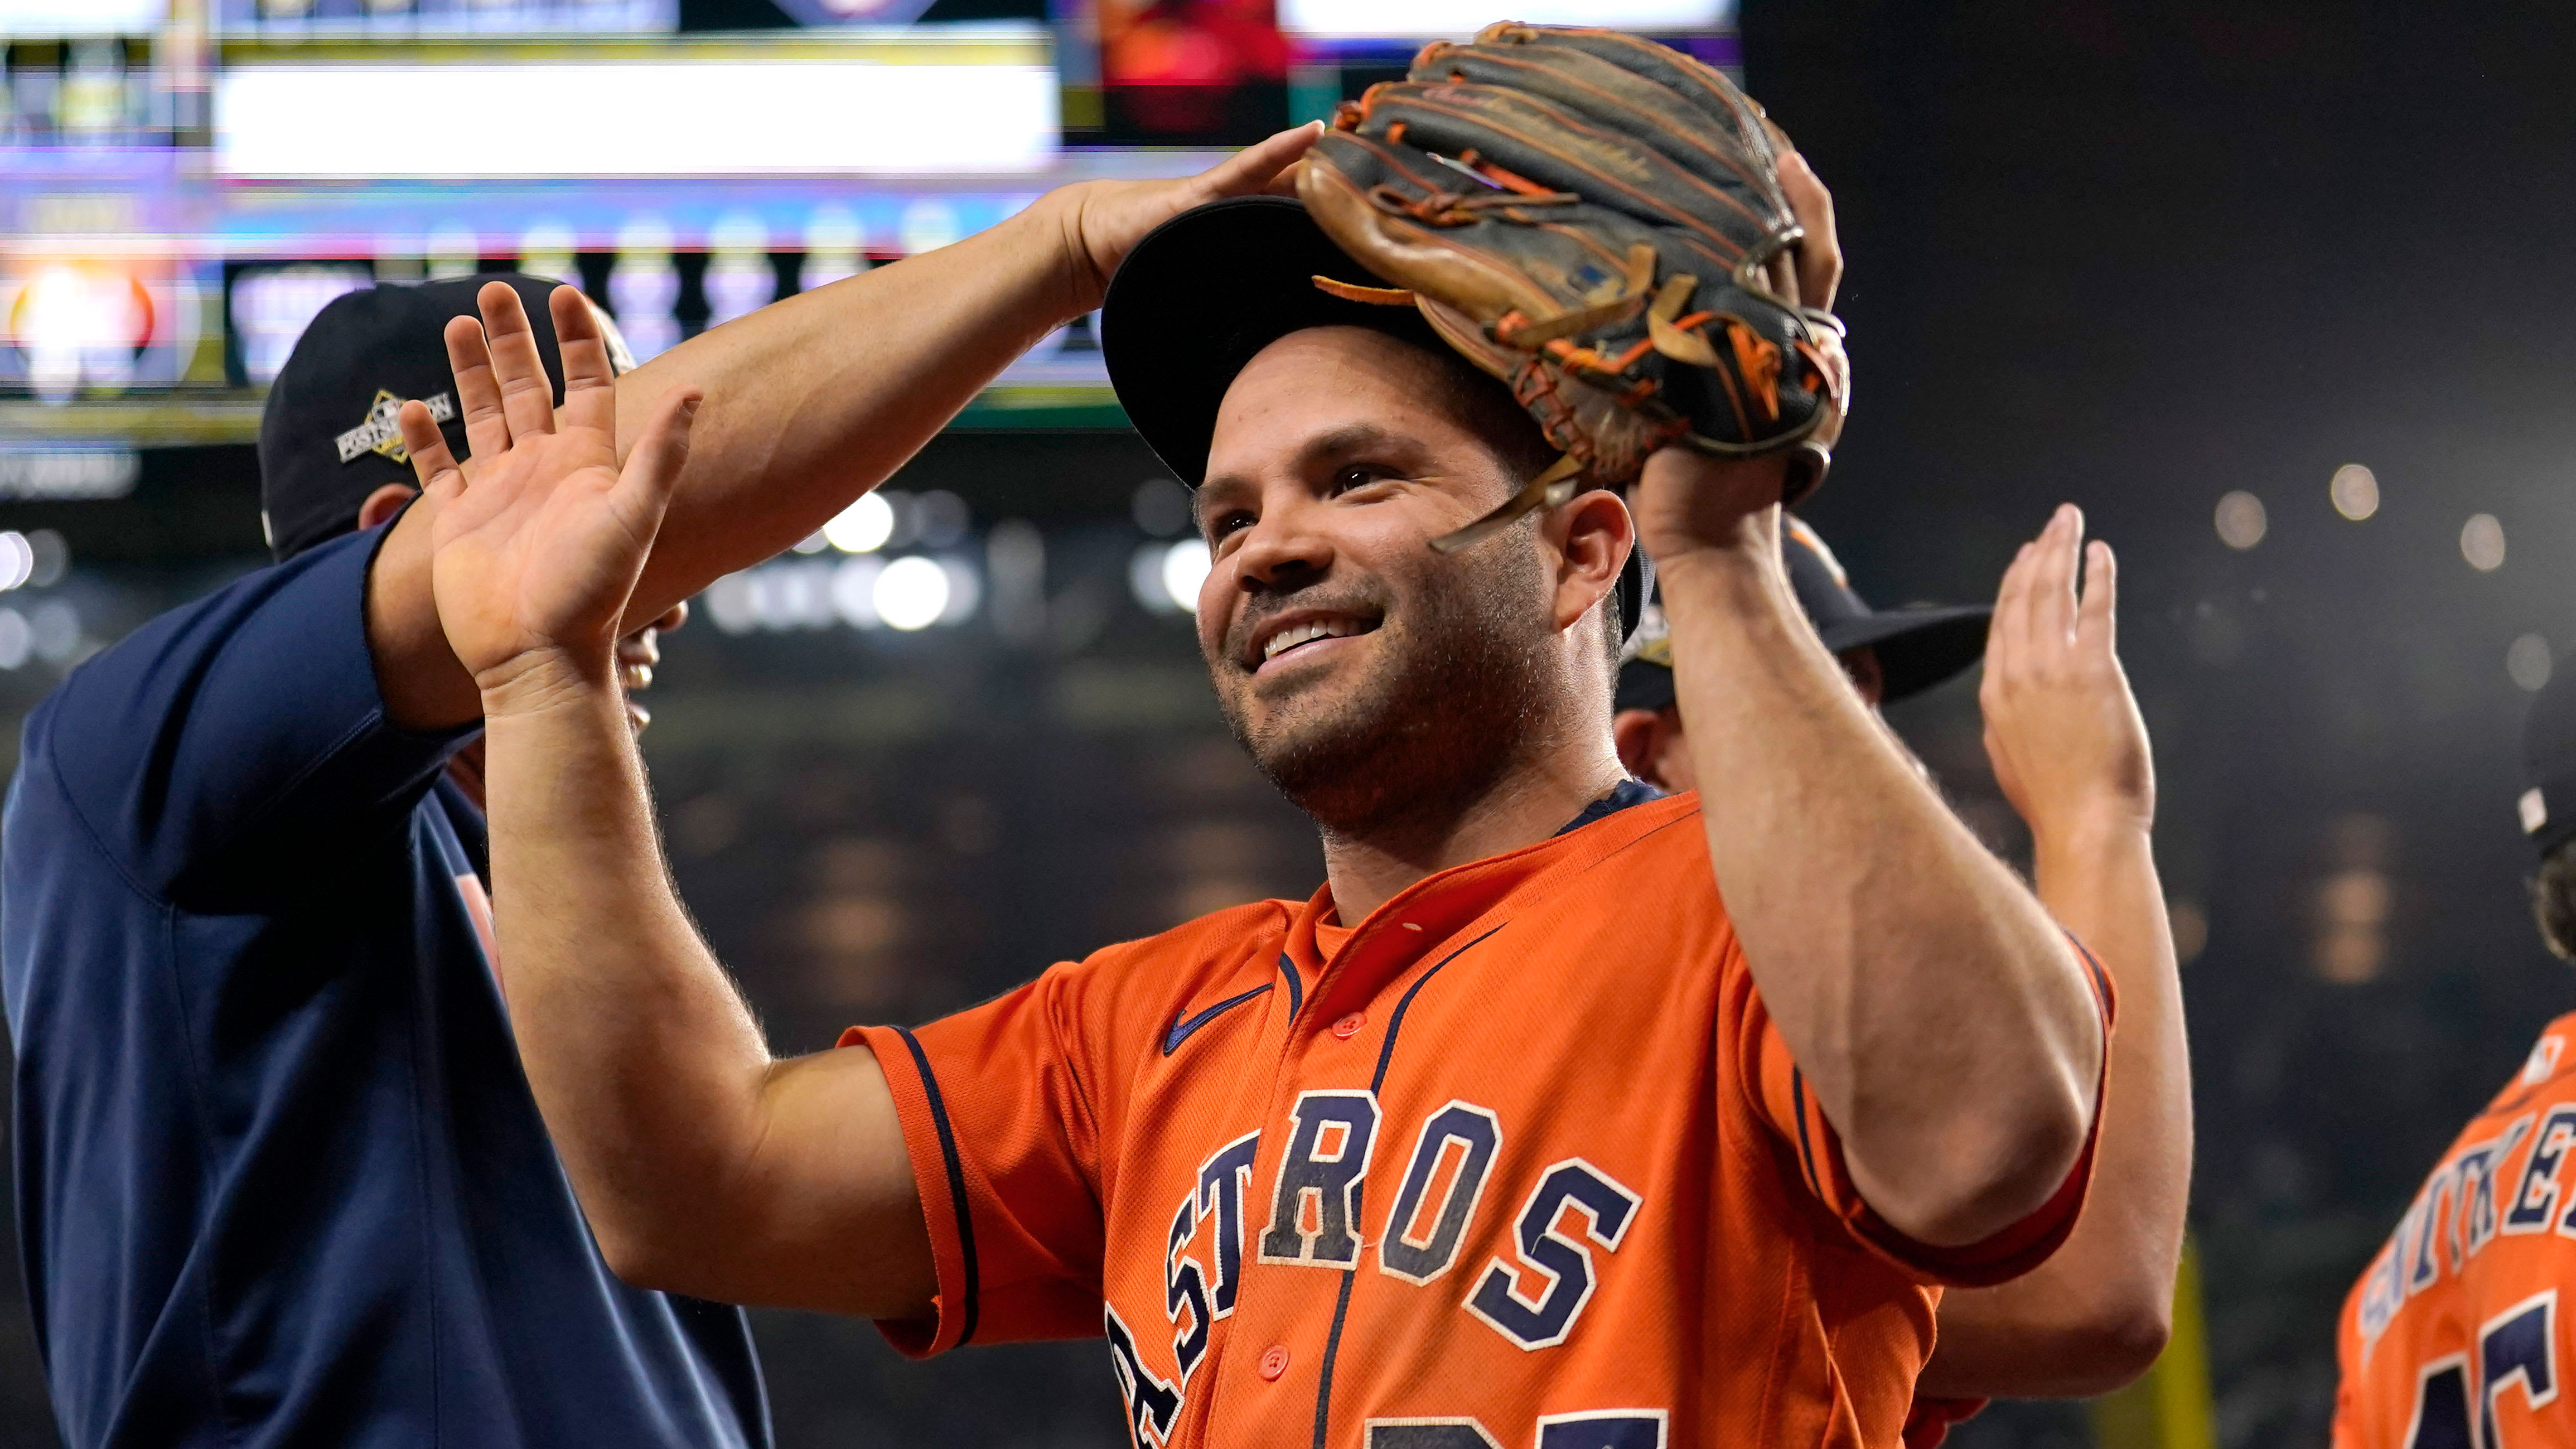 Jose Altuve smiles and raises his arms as a teammate pats him on the head